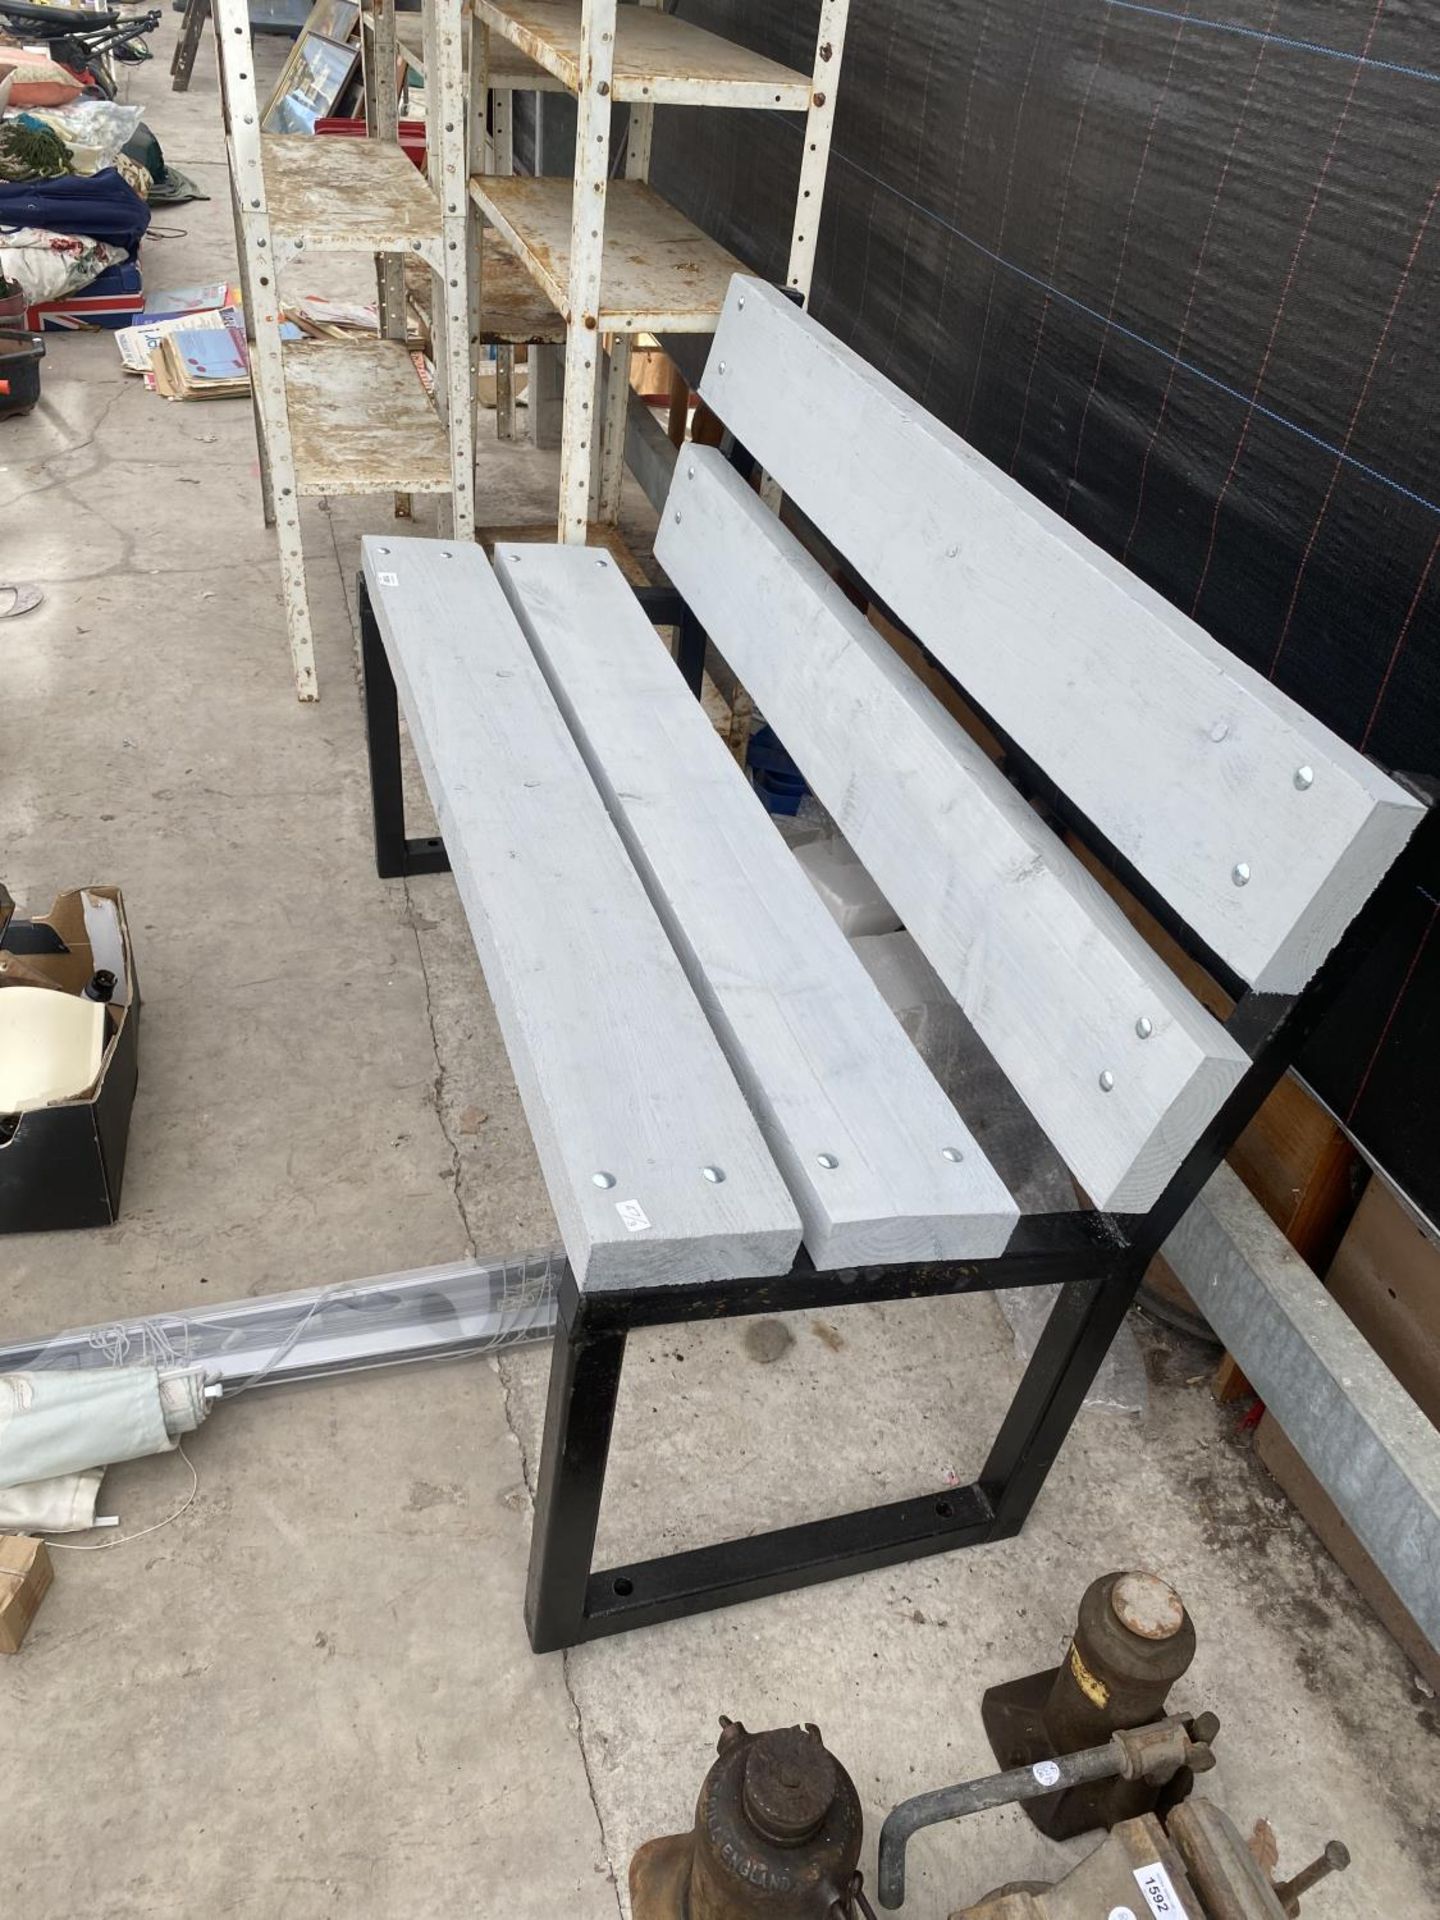 AN INDUSTRIAL STYLE WOODEN BENCH WITH METAL BENCH ENDS